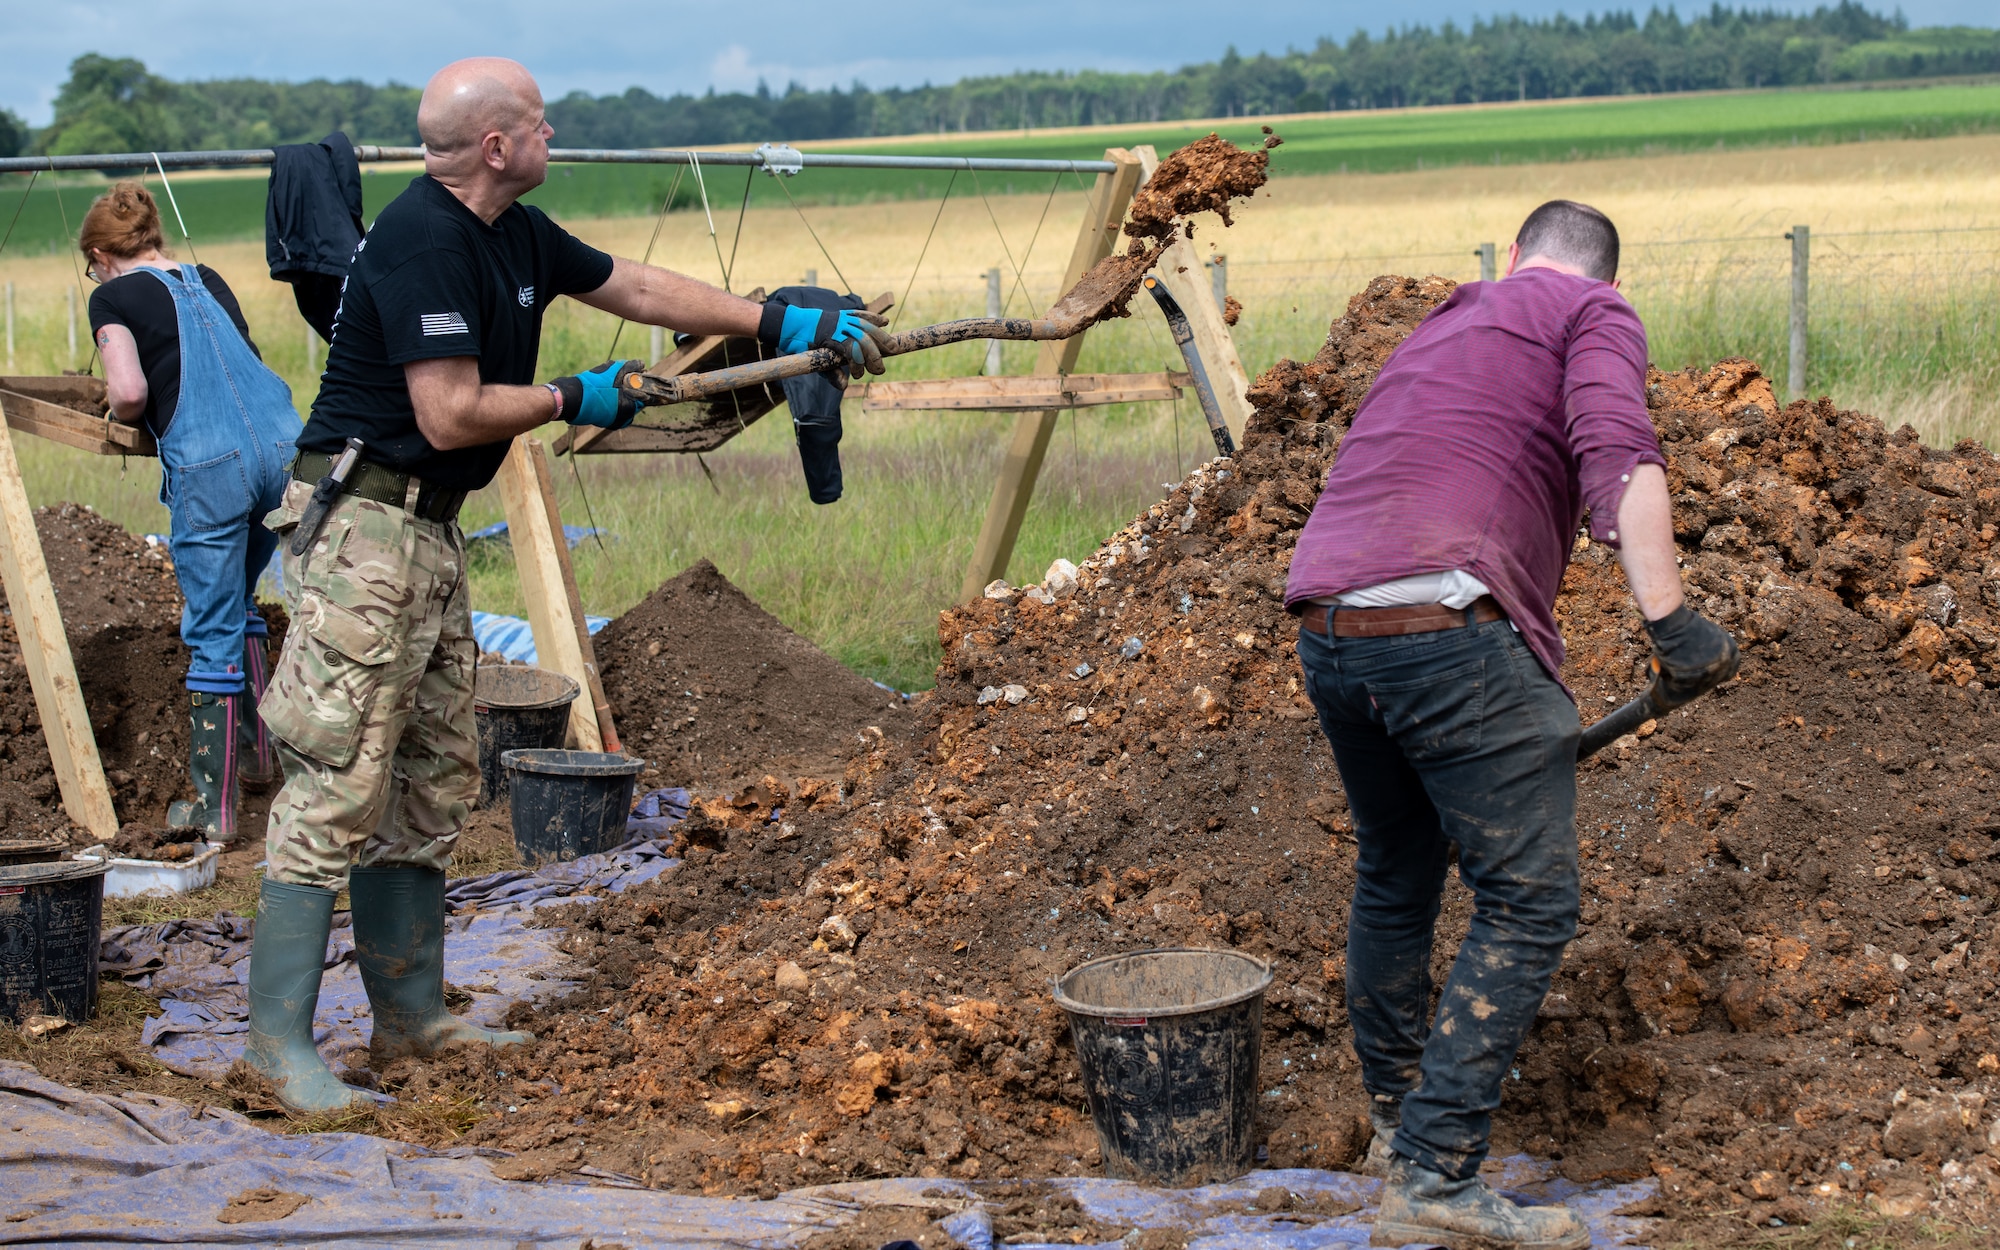 Volunteers with American Veterans Archaeological Recovery separate dirt and clay while trying to recover the remains of an aircrew from a World War II era B-24 Liberator crash site at Park Farm, Arundel, England, July 8, 2021. The team was comprised of around 20 volunteers from local universities, veterans from both United States and British armed forces, and active duty service members from RAF Lakenheath. (U.S. Air Force photo by Airman 1st Class Cedrique Oldaker)